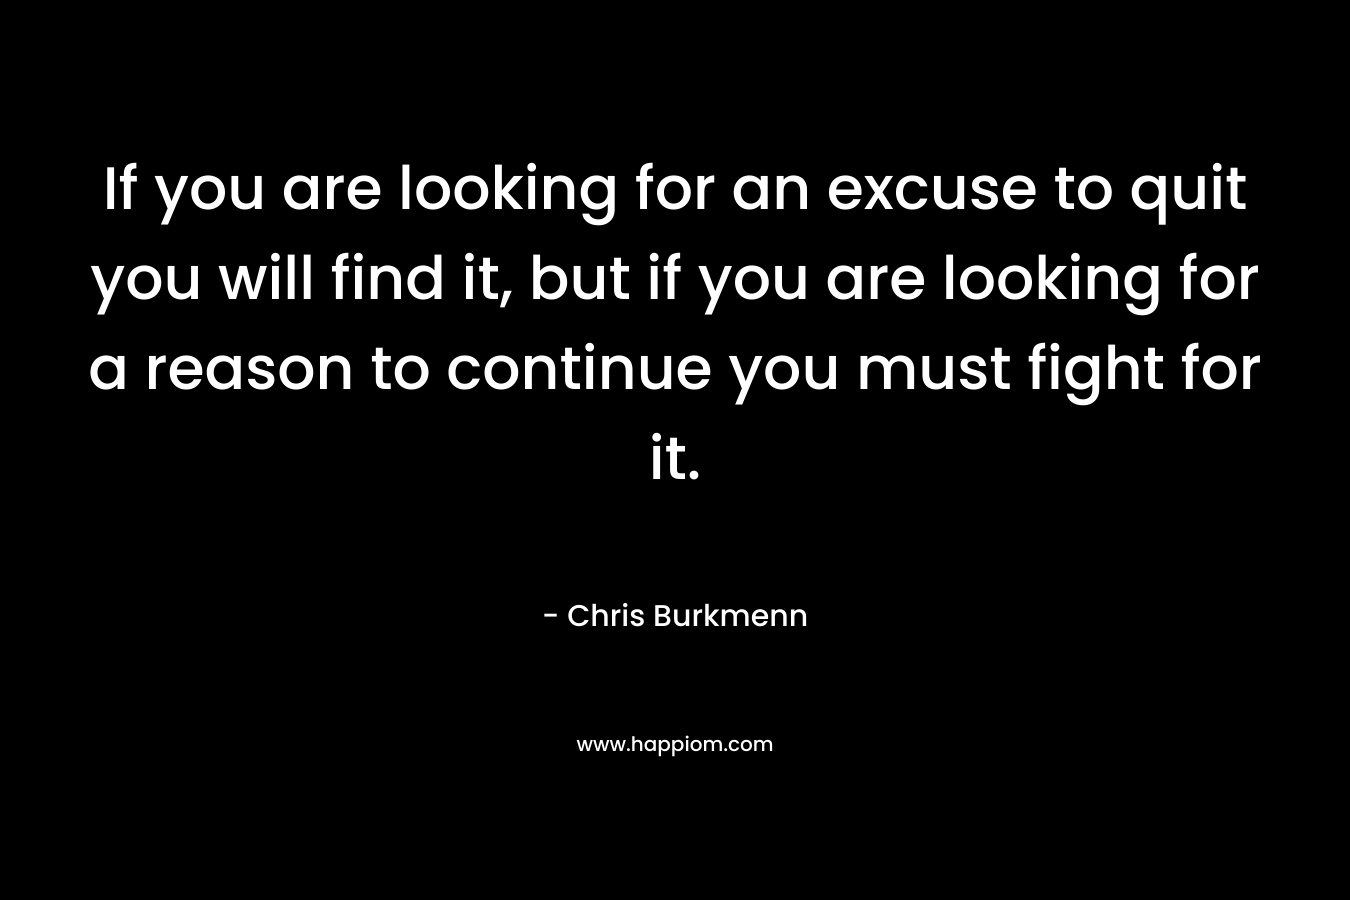 If you are looking for an excuse to quit you will find it, but if you are looking for a reason to continue you must fight for it. – Chris Burkmenn